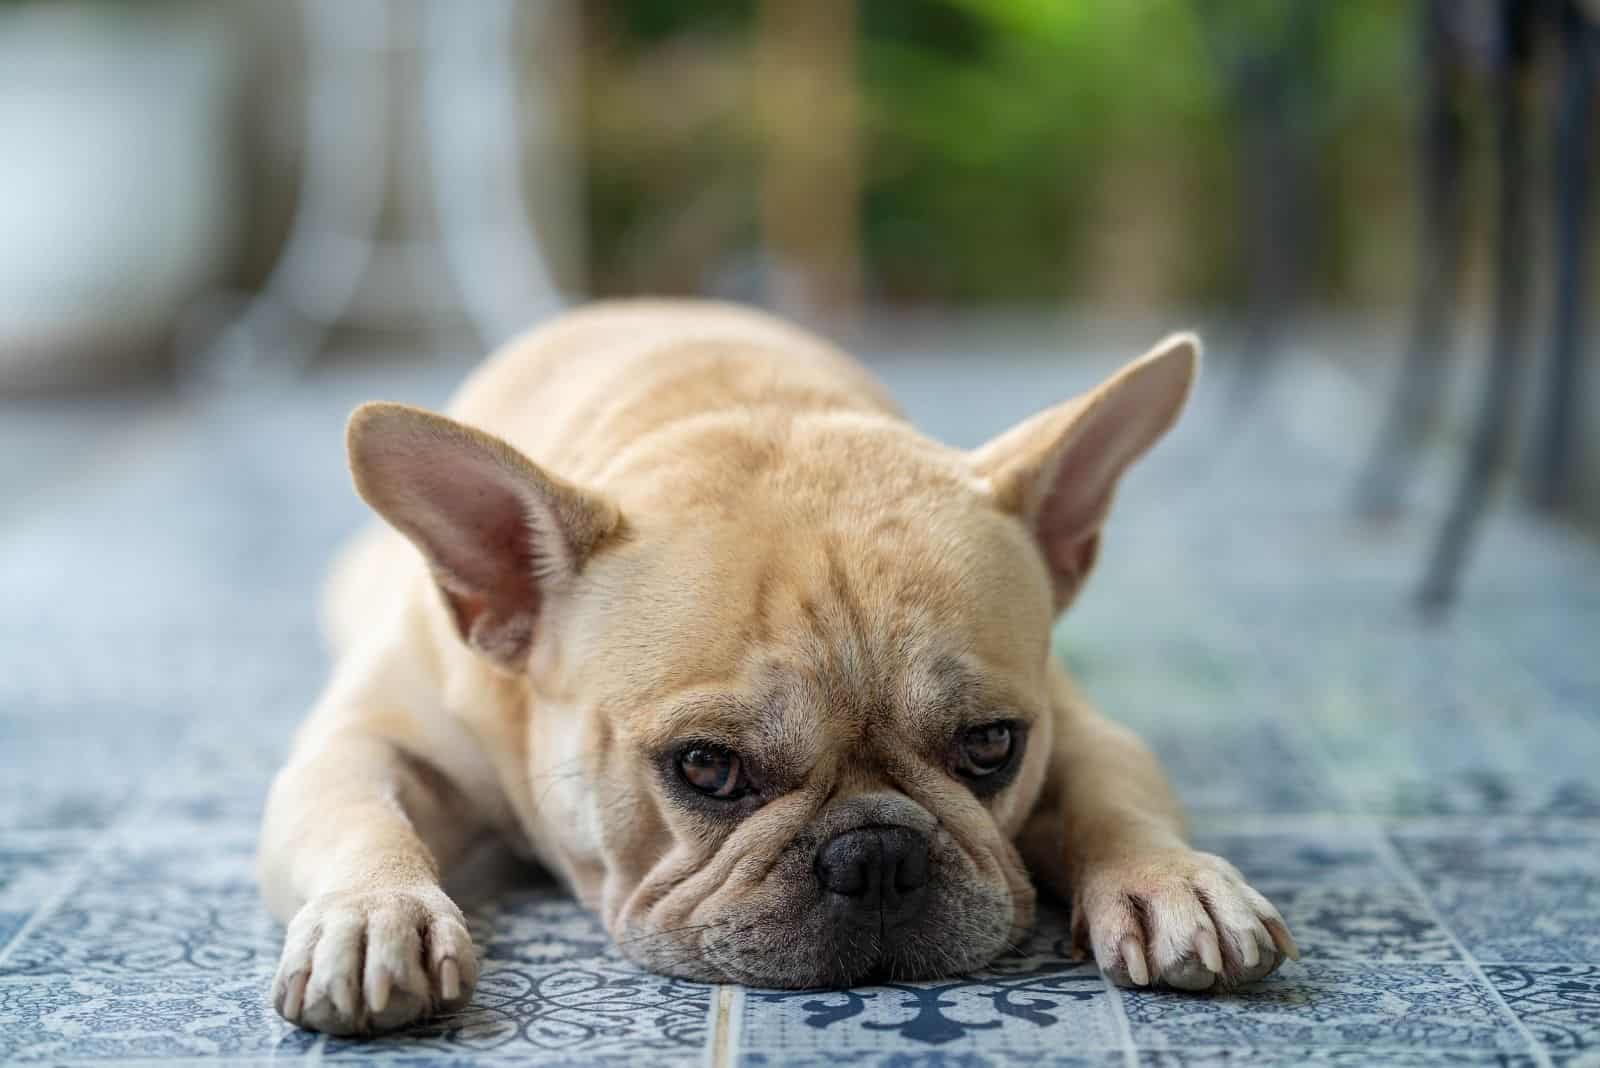 Are French Bulldogs a Hypoallergenic Dog Breed? Let's Dive